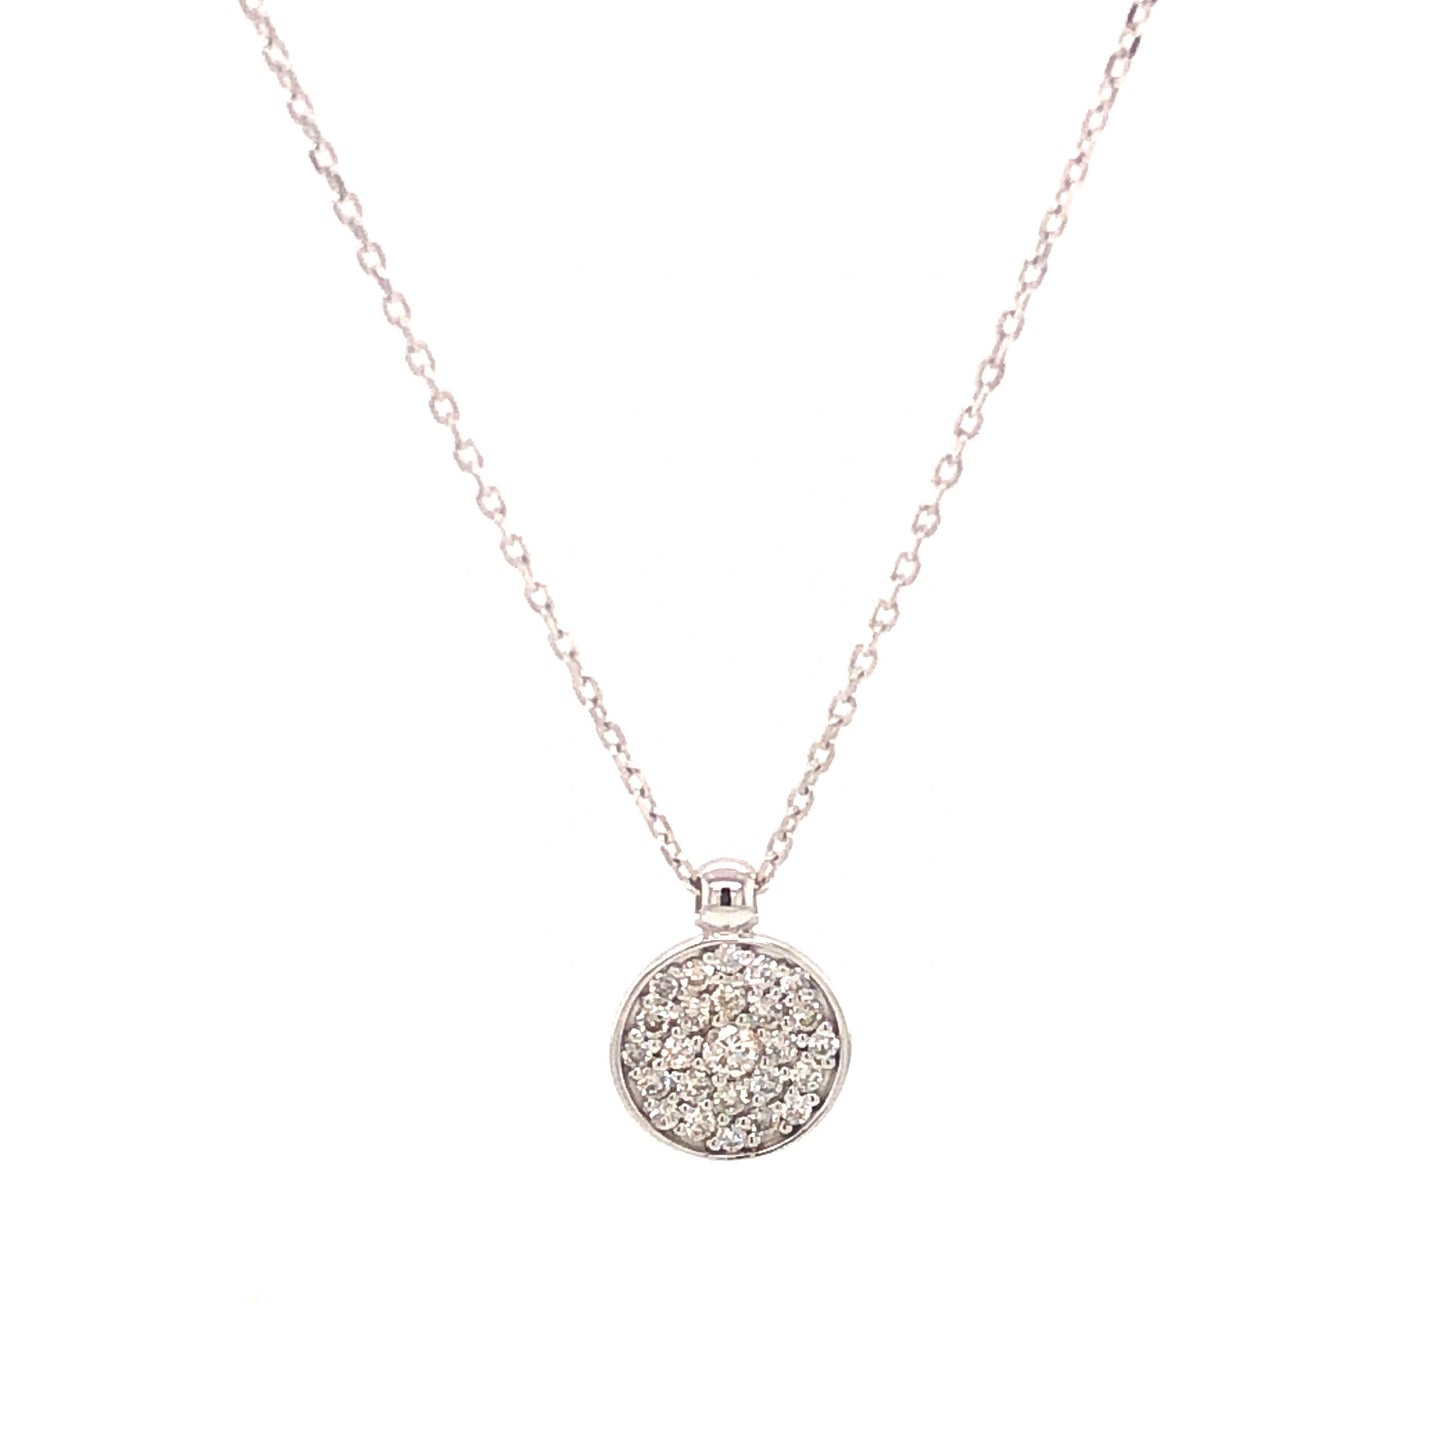 .25 Pave Diamond Pendant Necklace in 14k White Gold